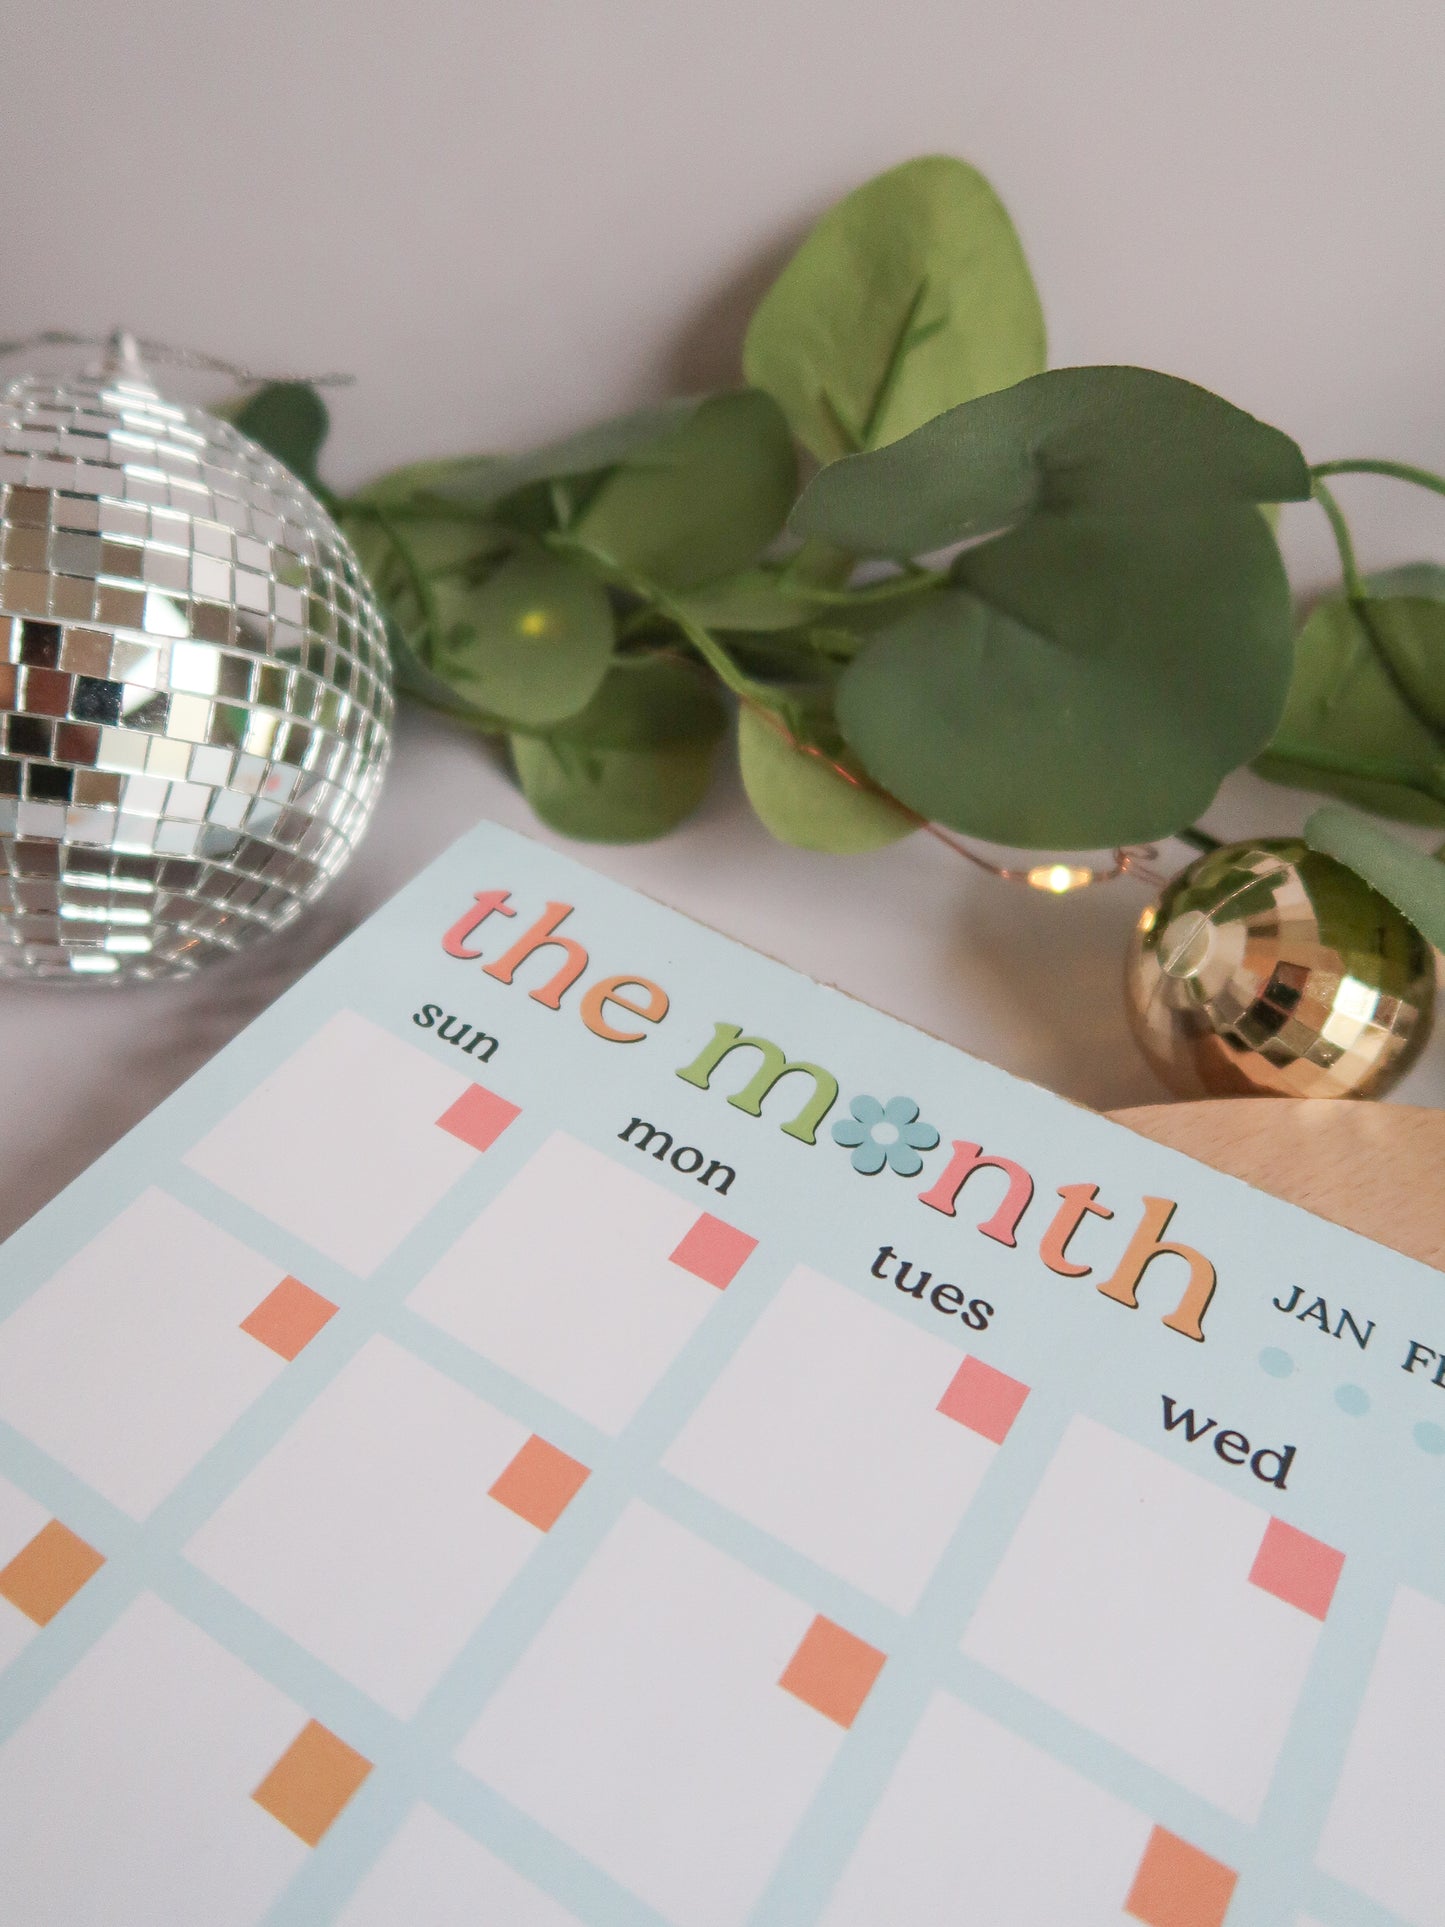 The Month - Monthly Planner Notepad